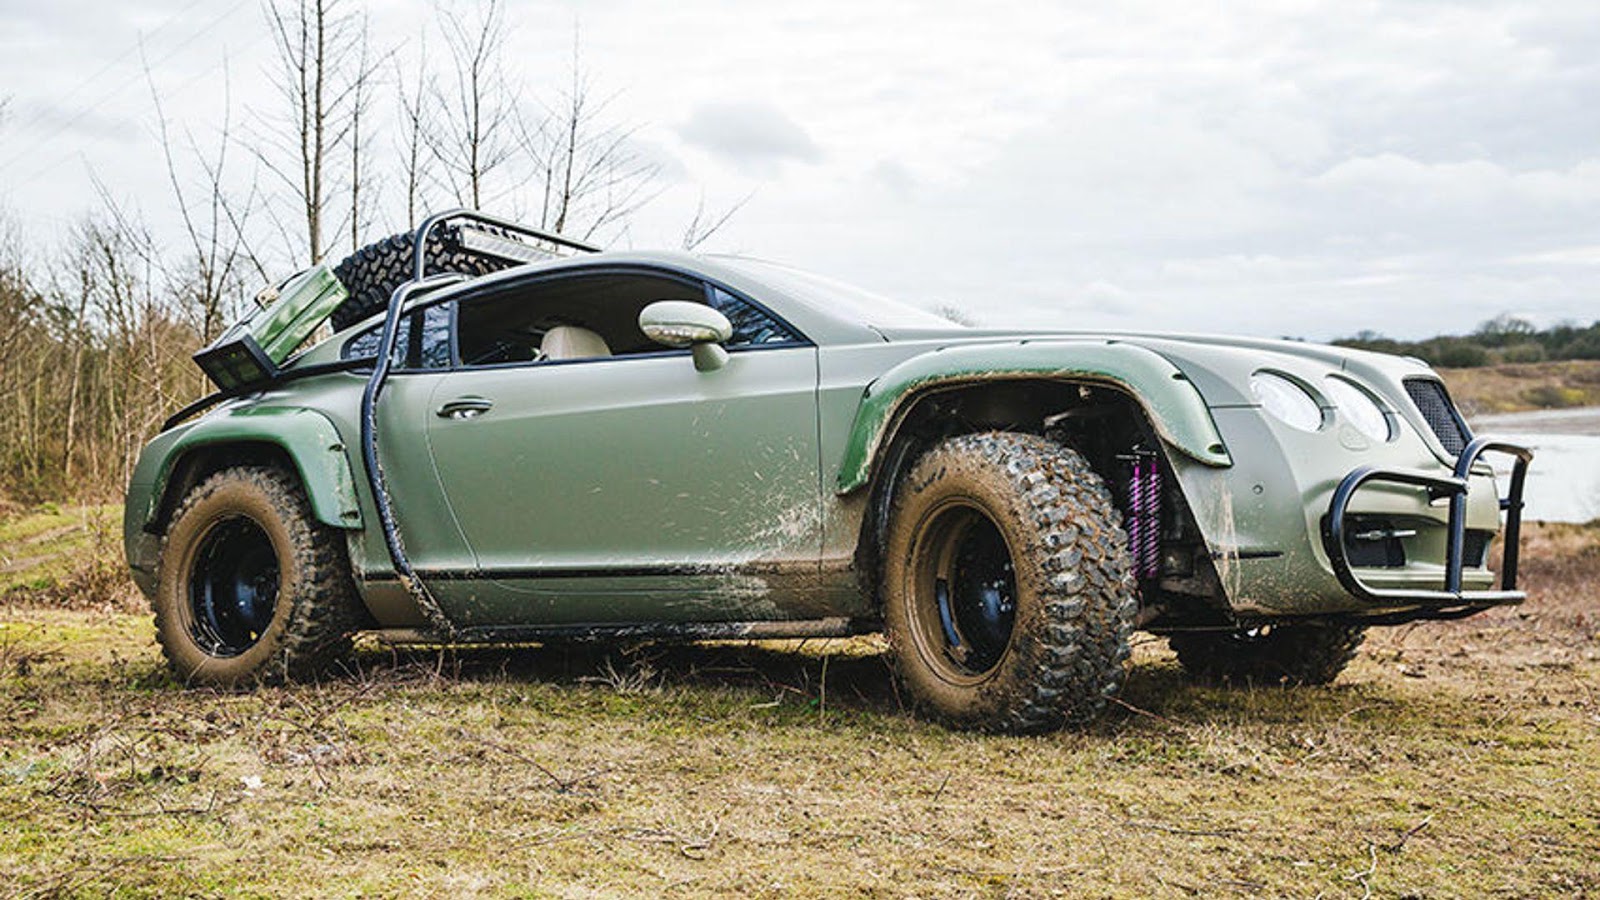 Bentley-Continental-GT-Off-Road-Auction-3.jpg